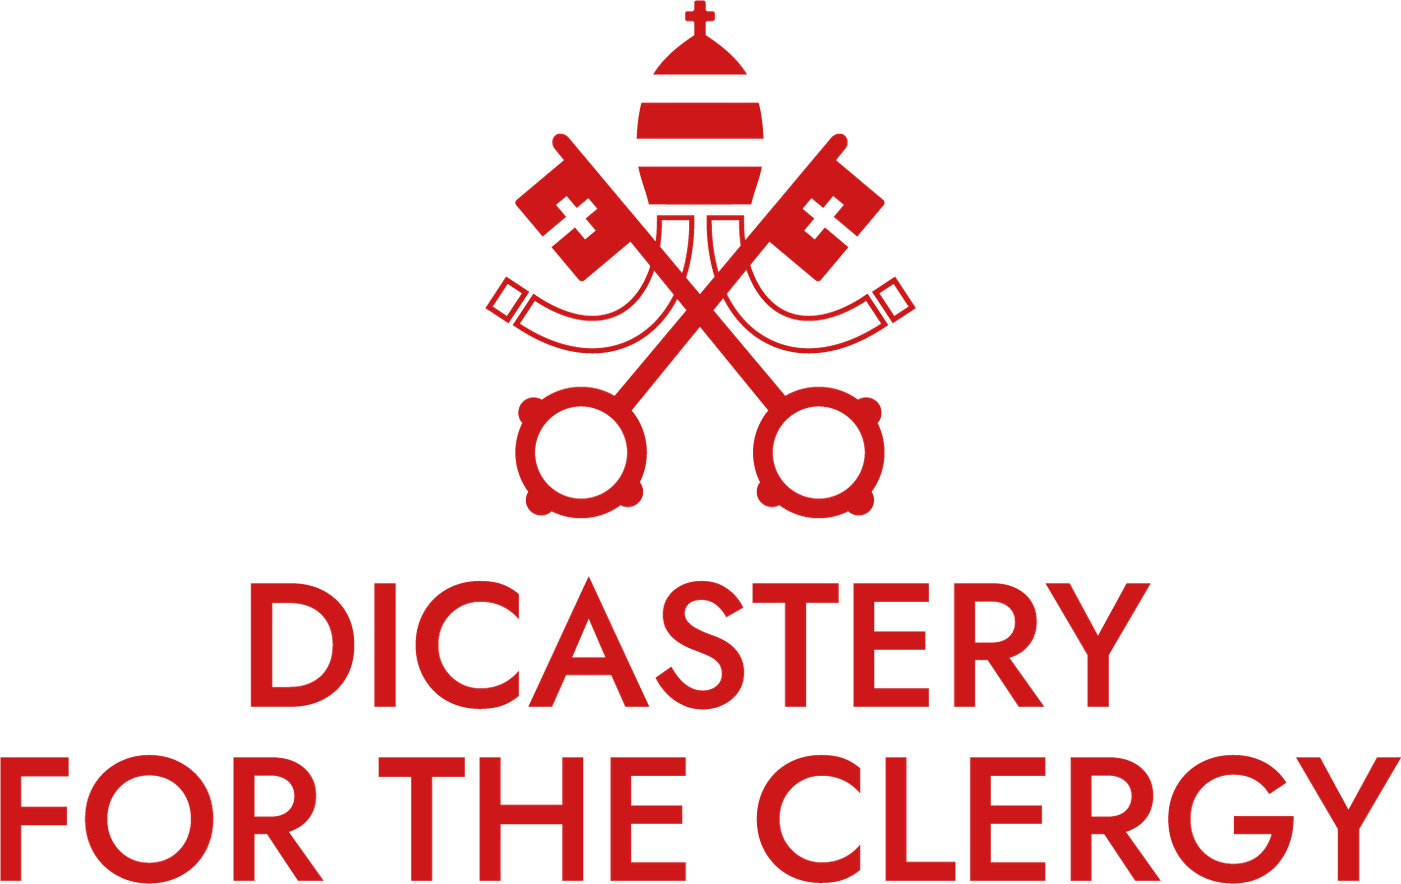 Dicastery Clerus